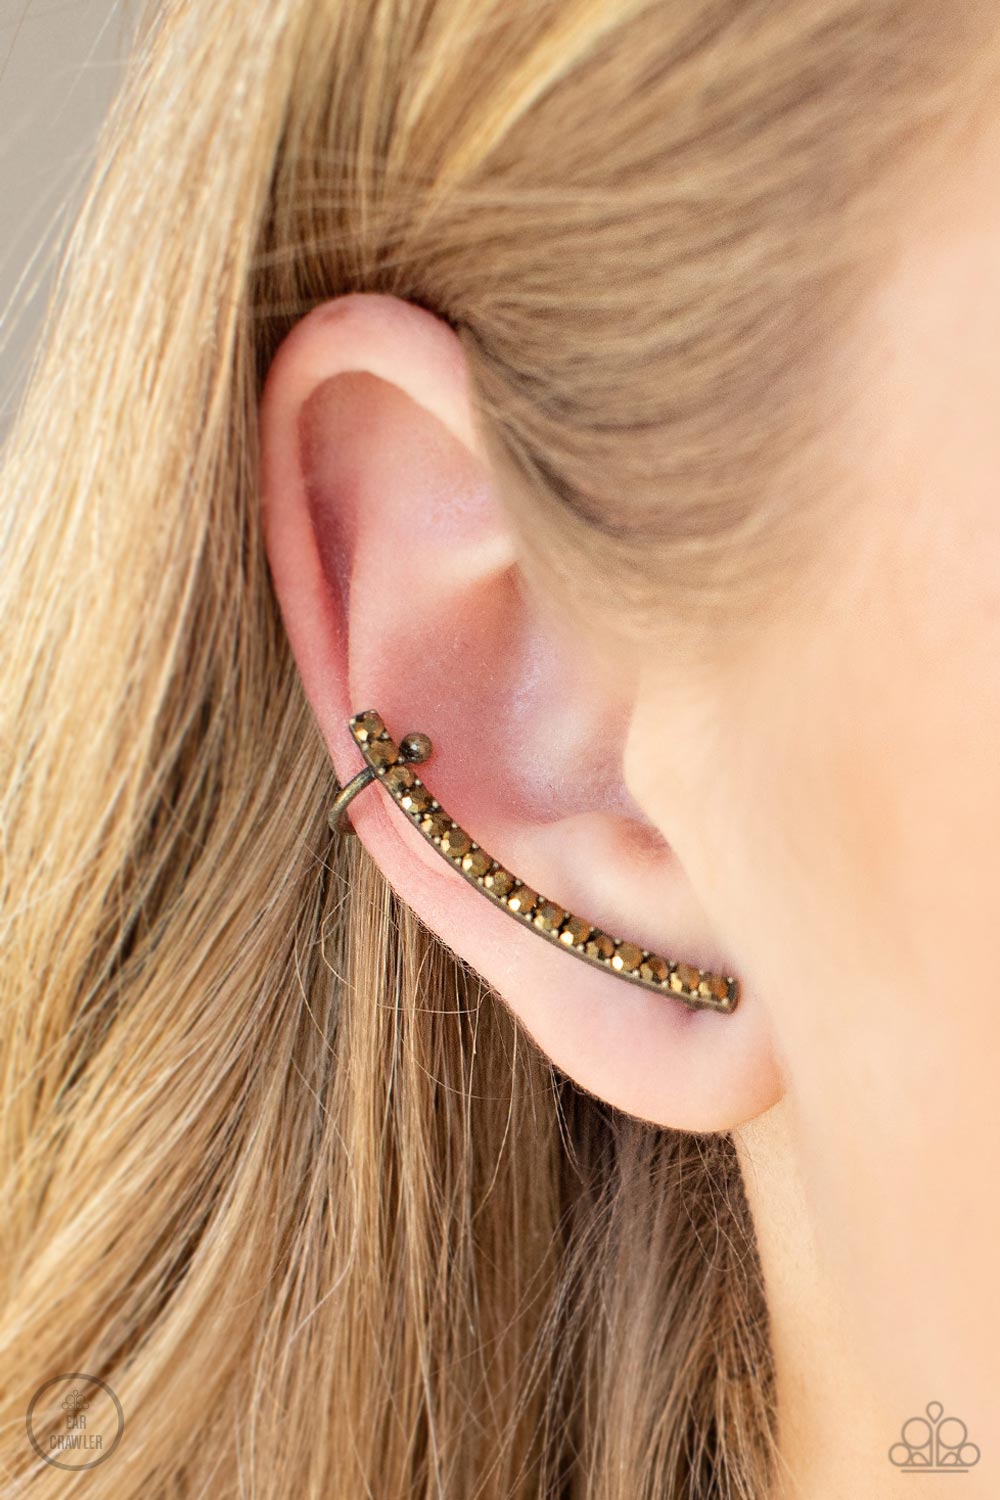 Give Me the SWOOP - Brass Aurum Rhinestone Crawler Post Earrings dainty row of glitzy aurum rhinestones is encrusted along a gritty brass bar that swoops up the ear for a smoldering style. Features a dainty cuff attached to the top for a secure fit.  Sold as one pair of ear crawlers.  Paparazzi Jewelry is lead and nickel free so it's perfect for sensitive skin too!